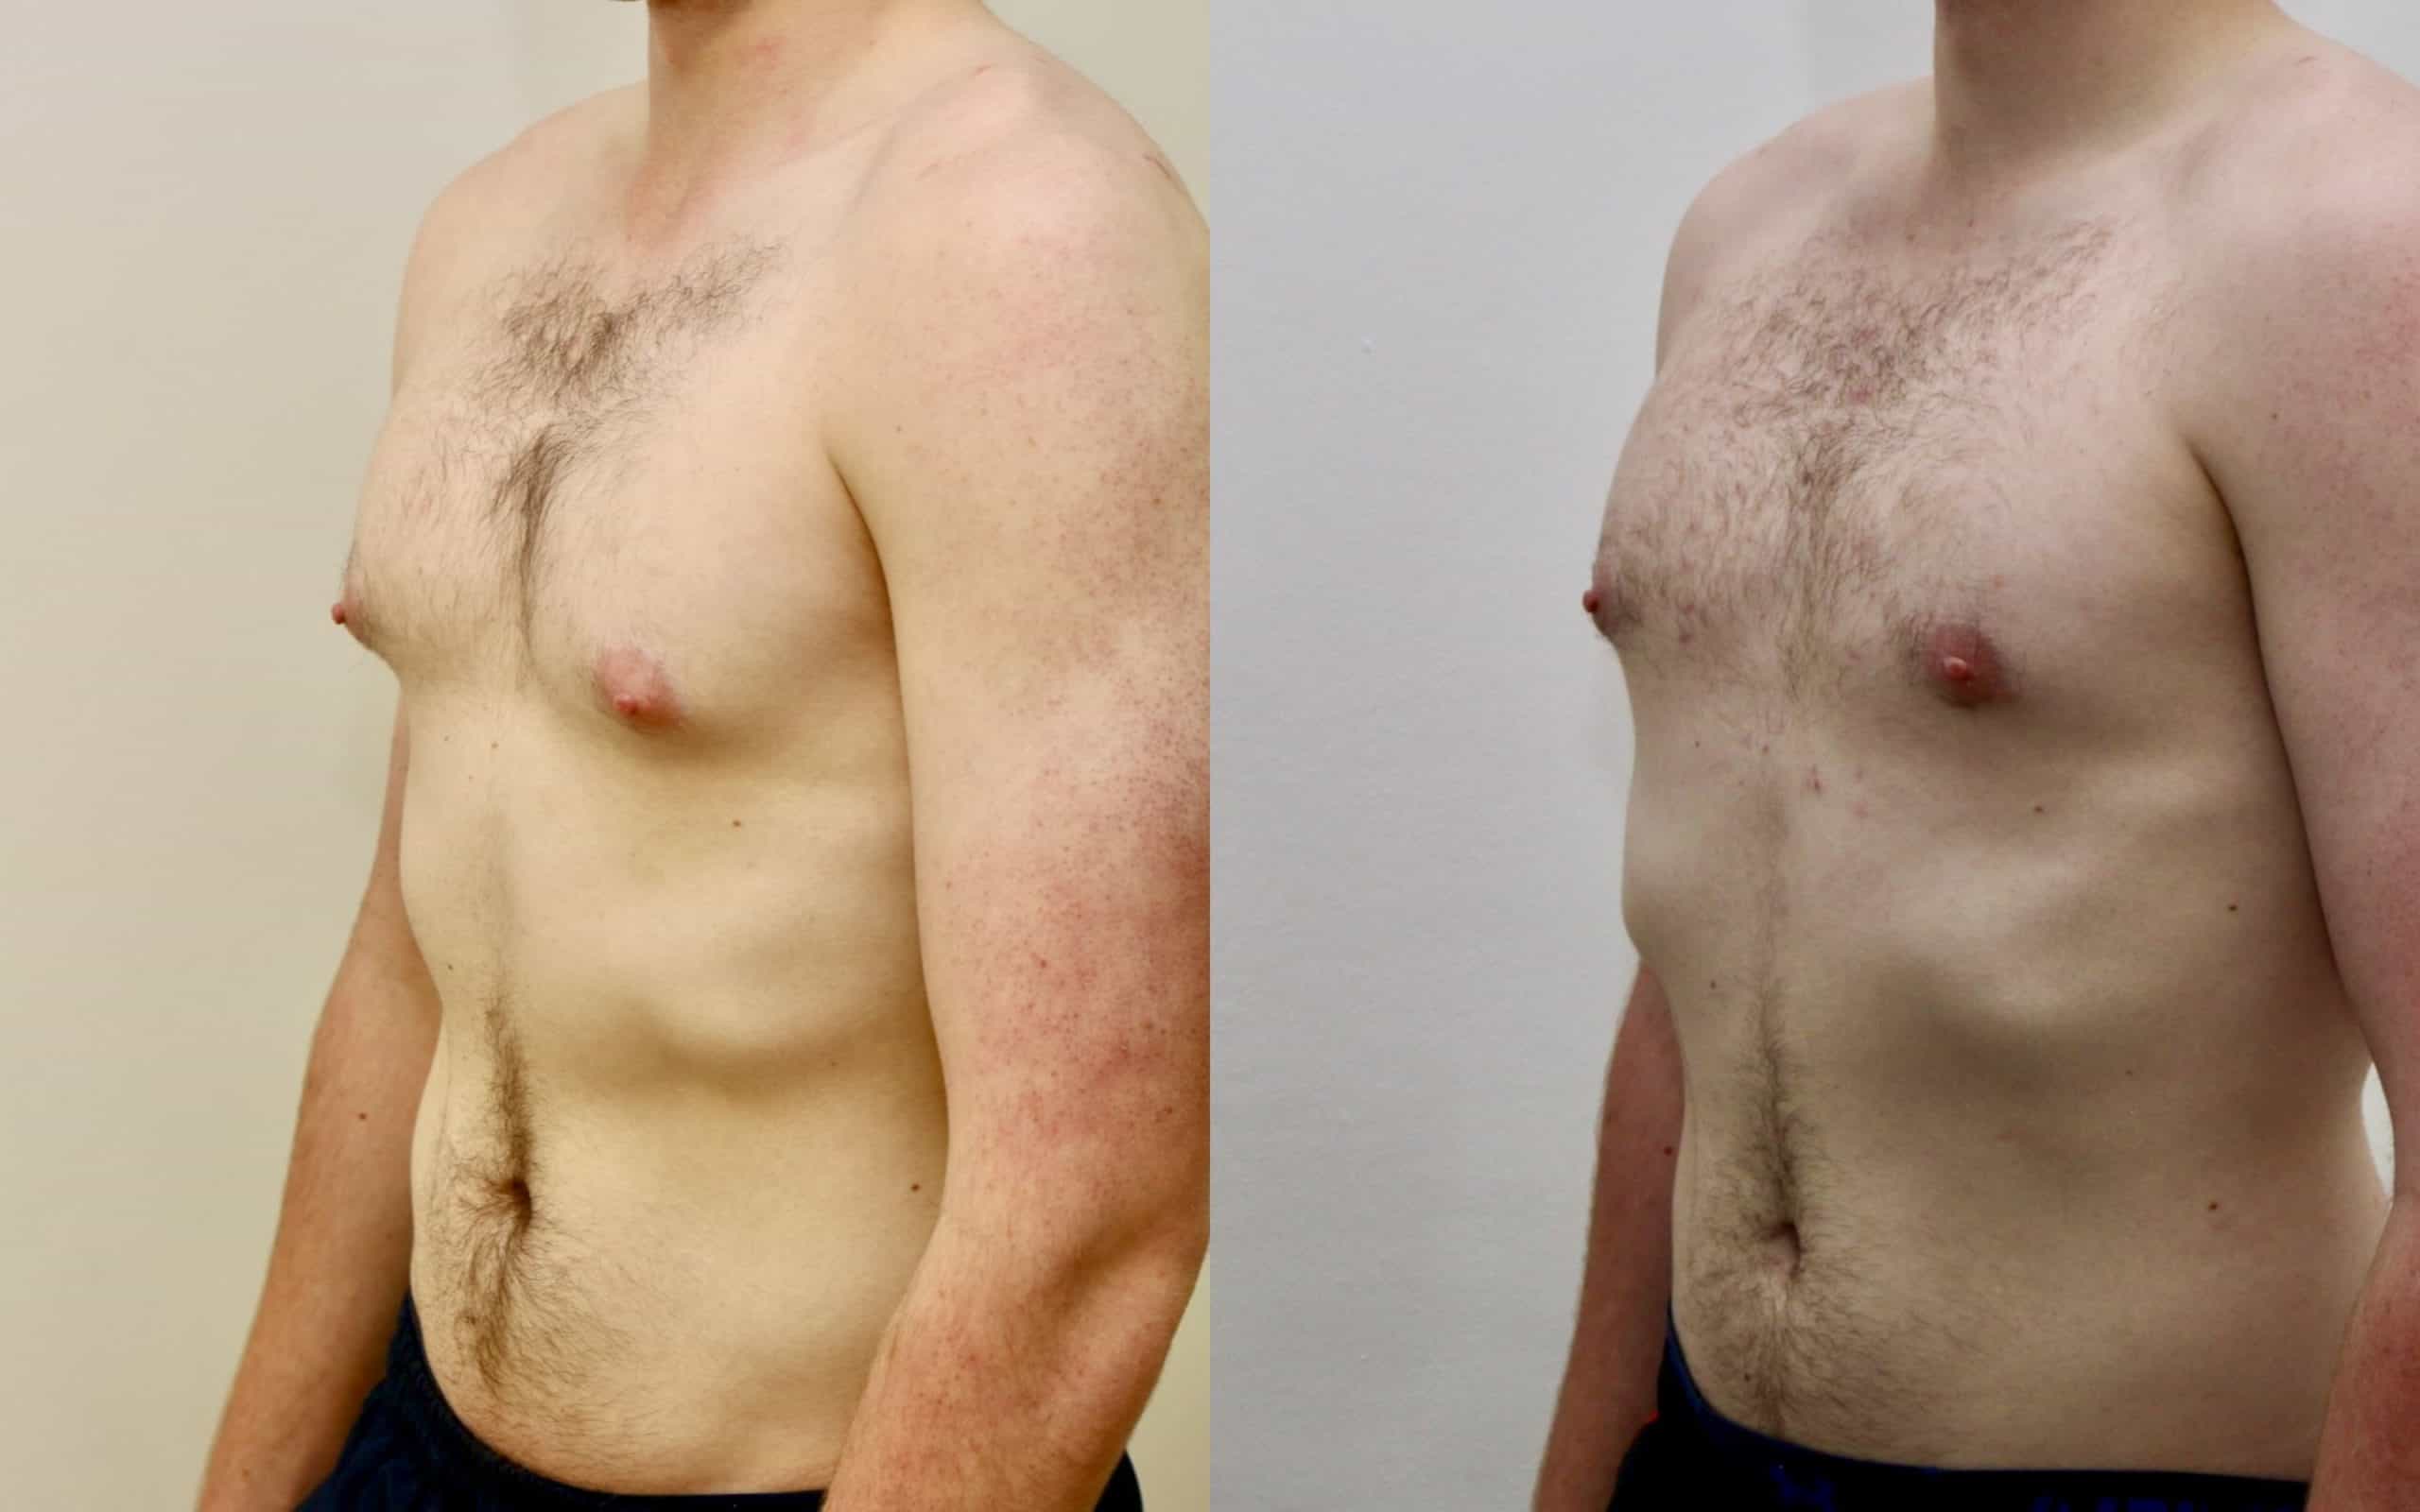 Gynecomastia liposuction and gland excision before and after